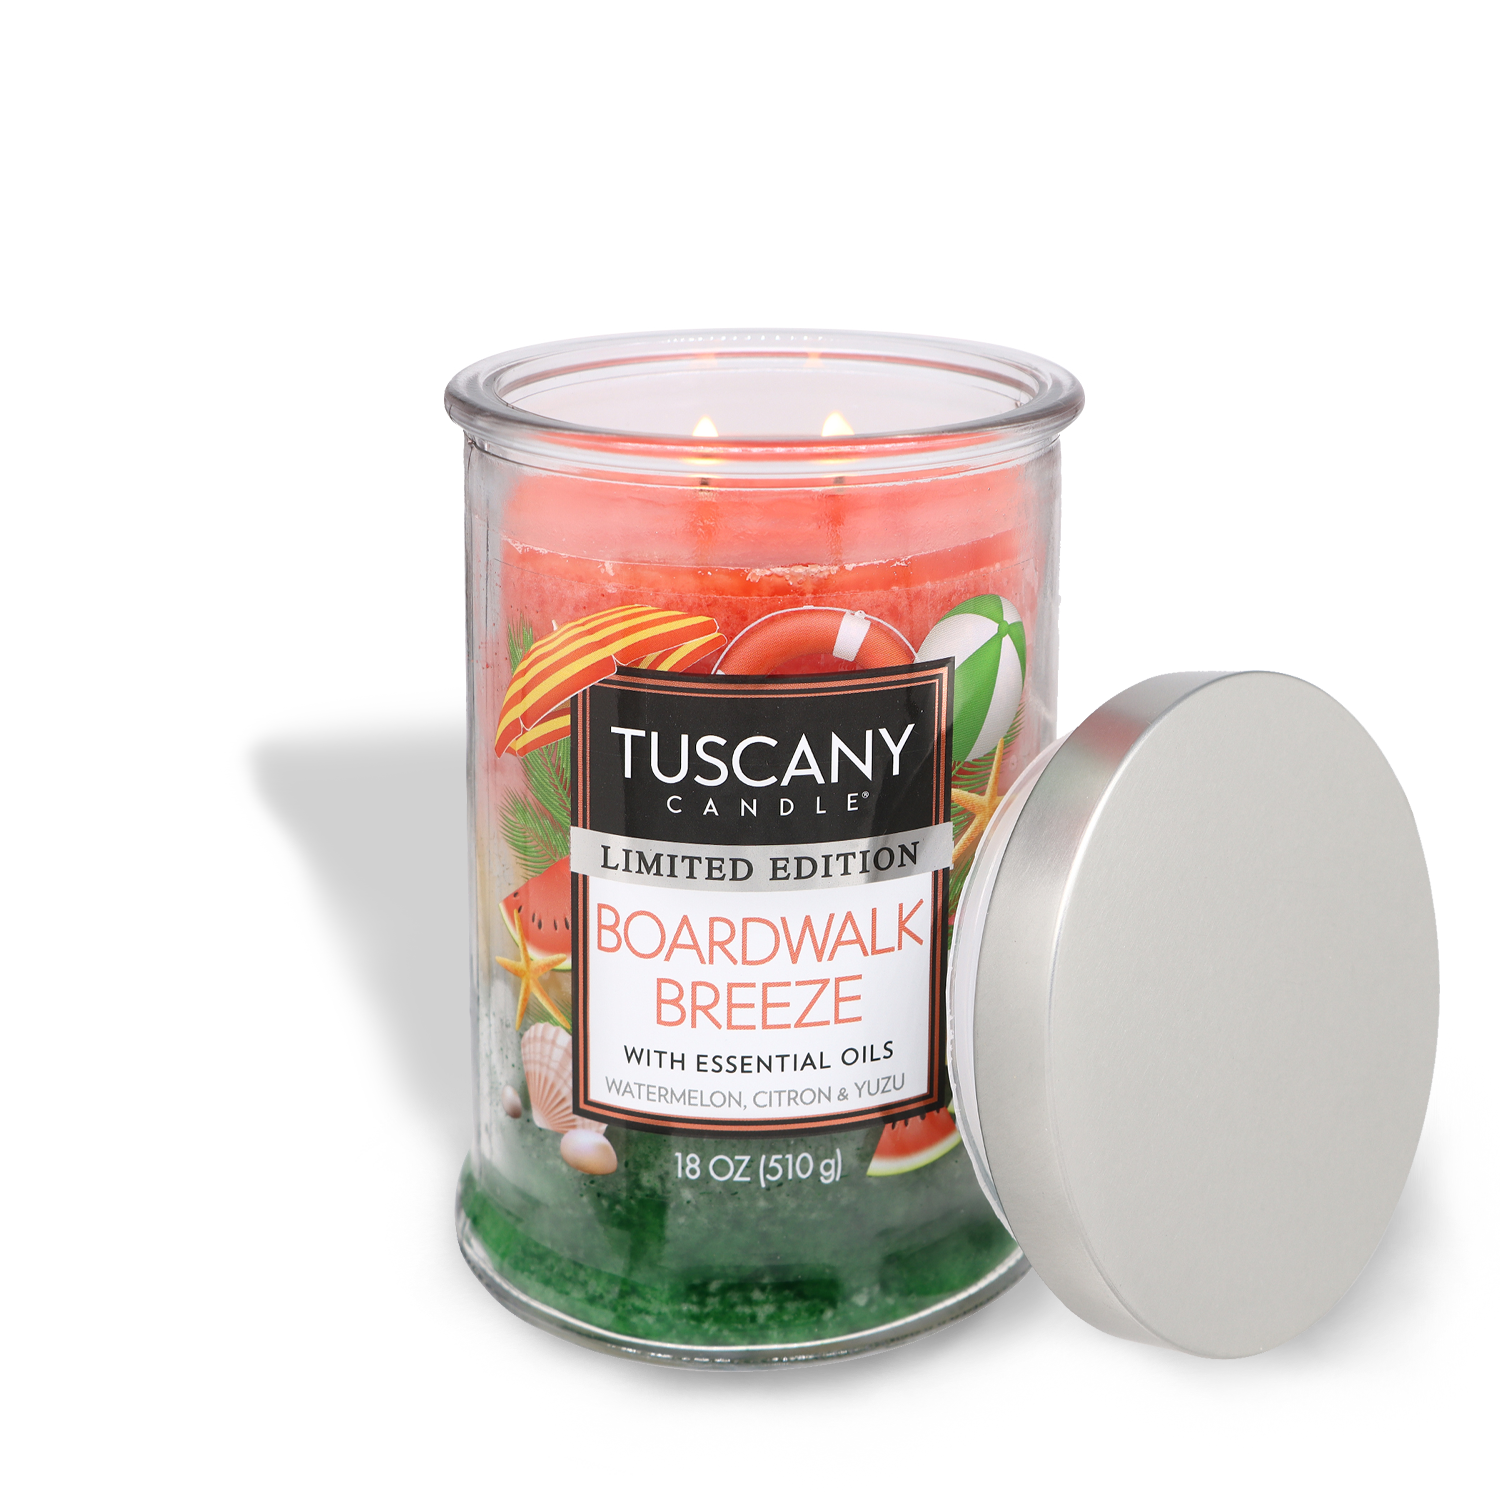 A Boardwalk Breeze Long-Lasting Scented Jar Candle (18 oz) with a lid featuring the scent of Tuscany.